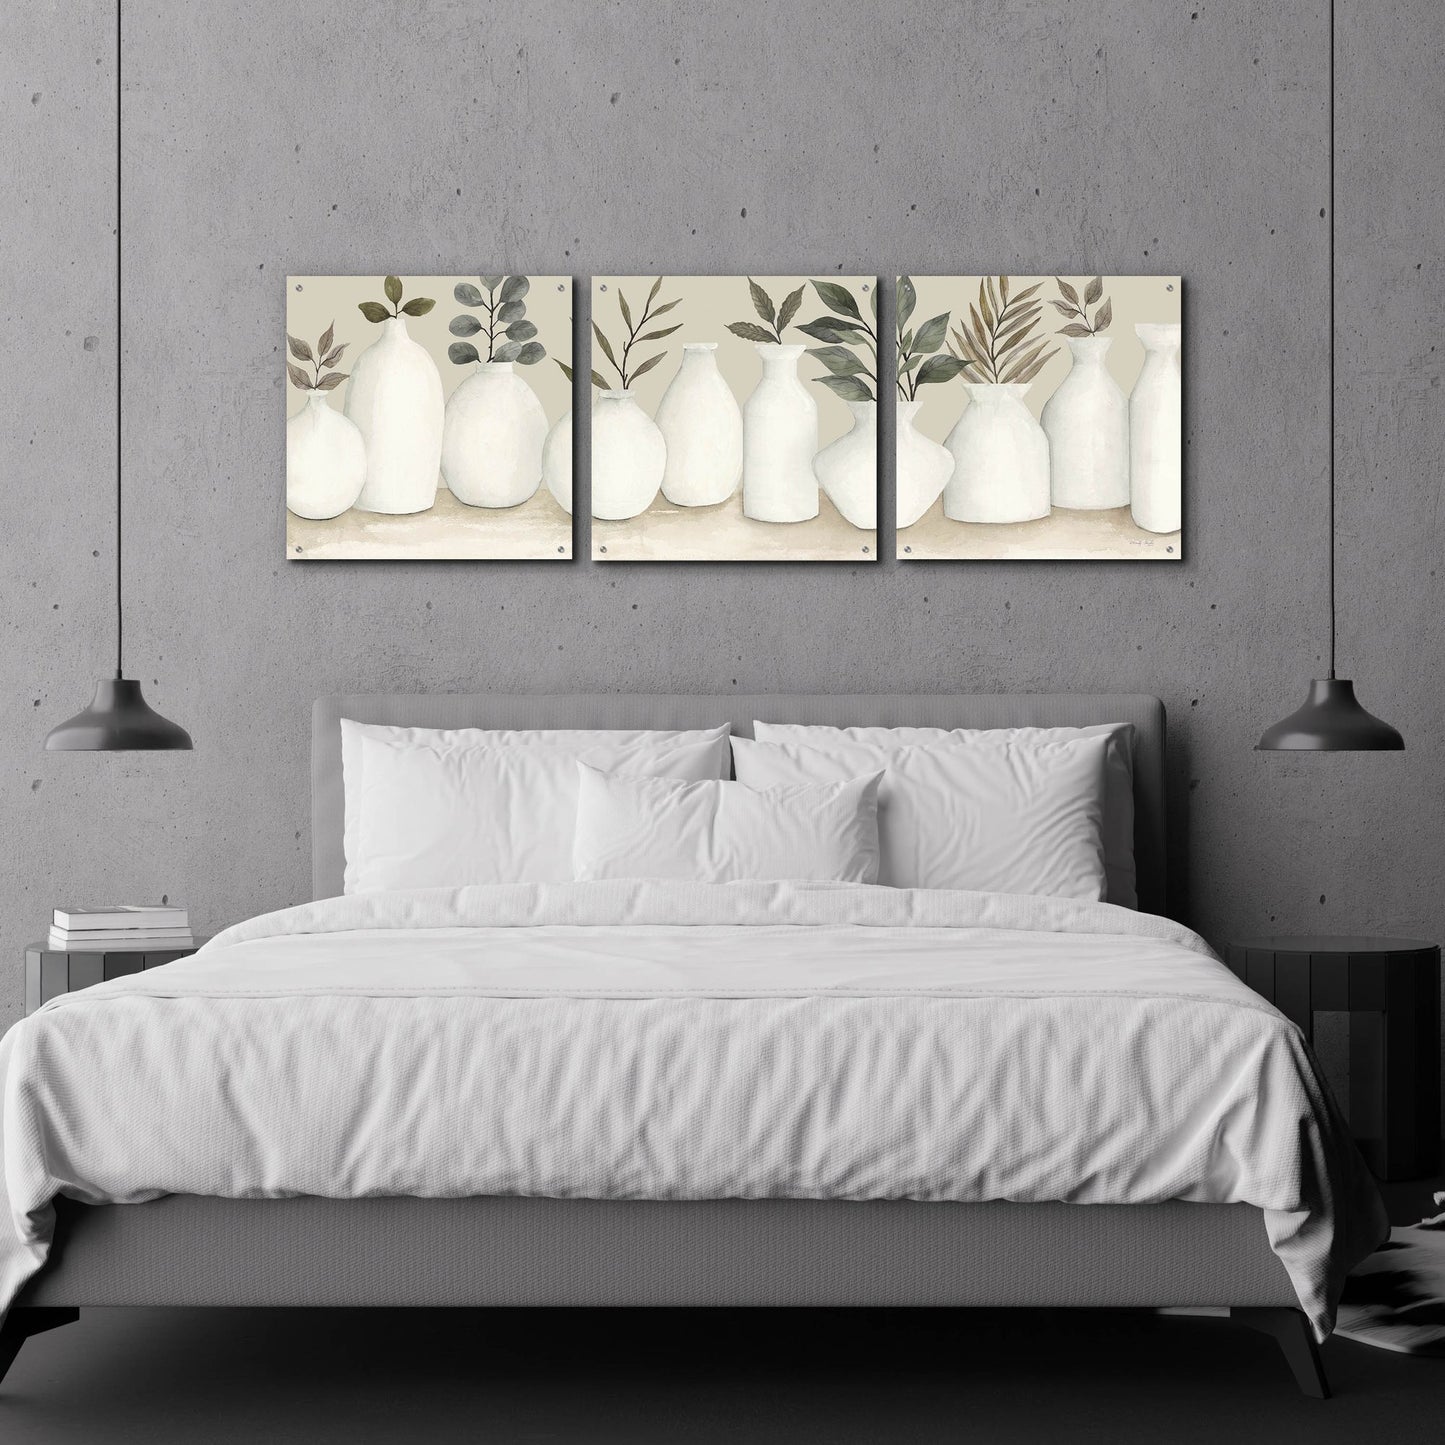 Epic Art 'Ivory Vases in a Row' by Cindy Jacobs, Acrylic Glass Wall Art, 3 Piece Set,72x24